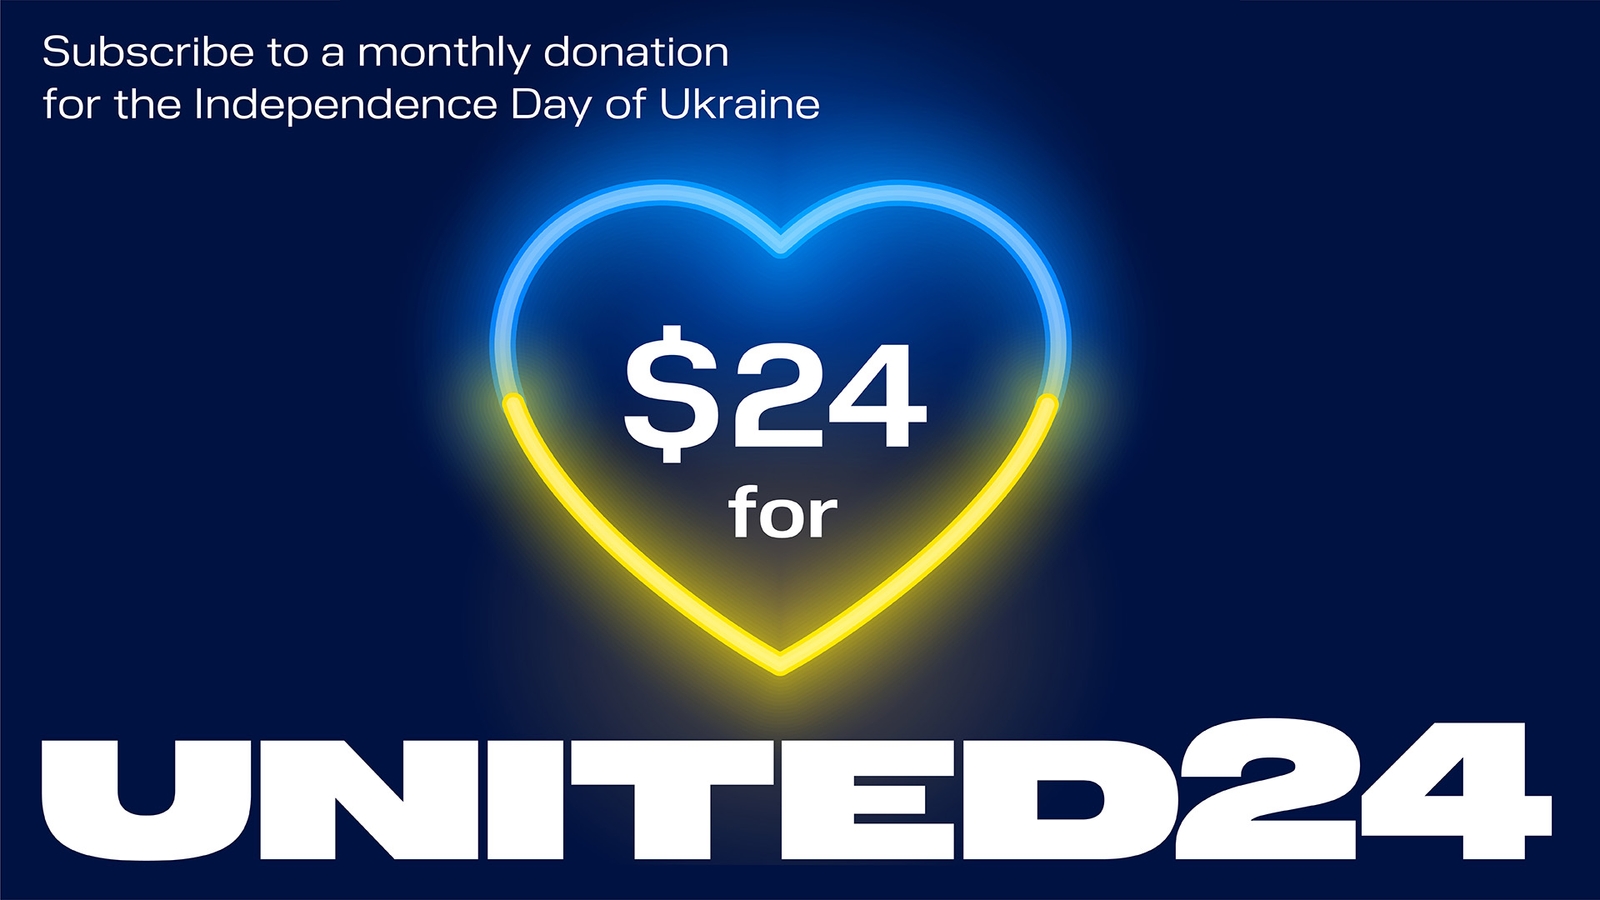 24,000 Friends of Ukraine: UNITED24 Fundraising Platform Launches A Project, Marking  the Independence Day of Ukraine